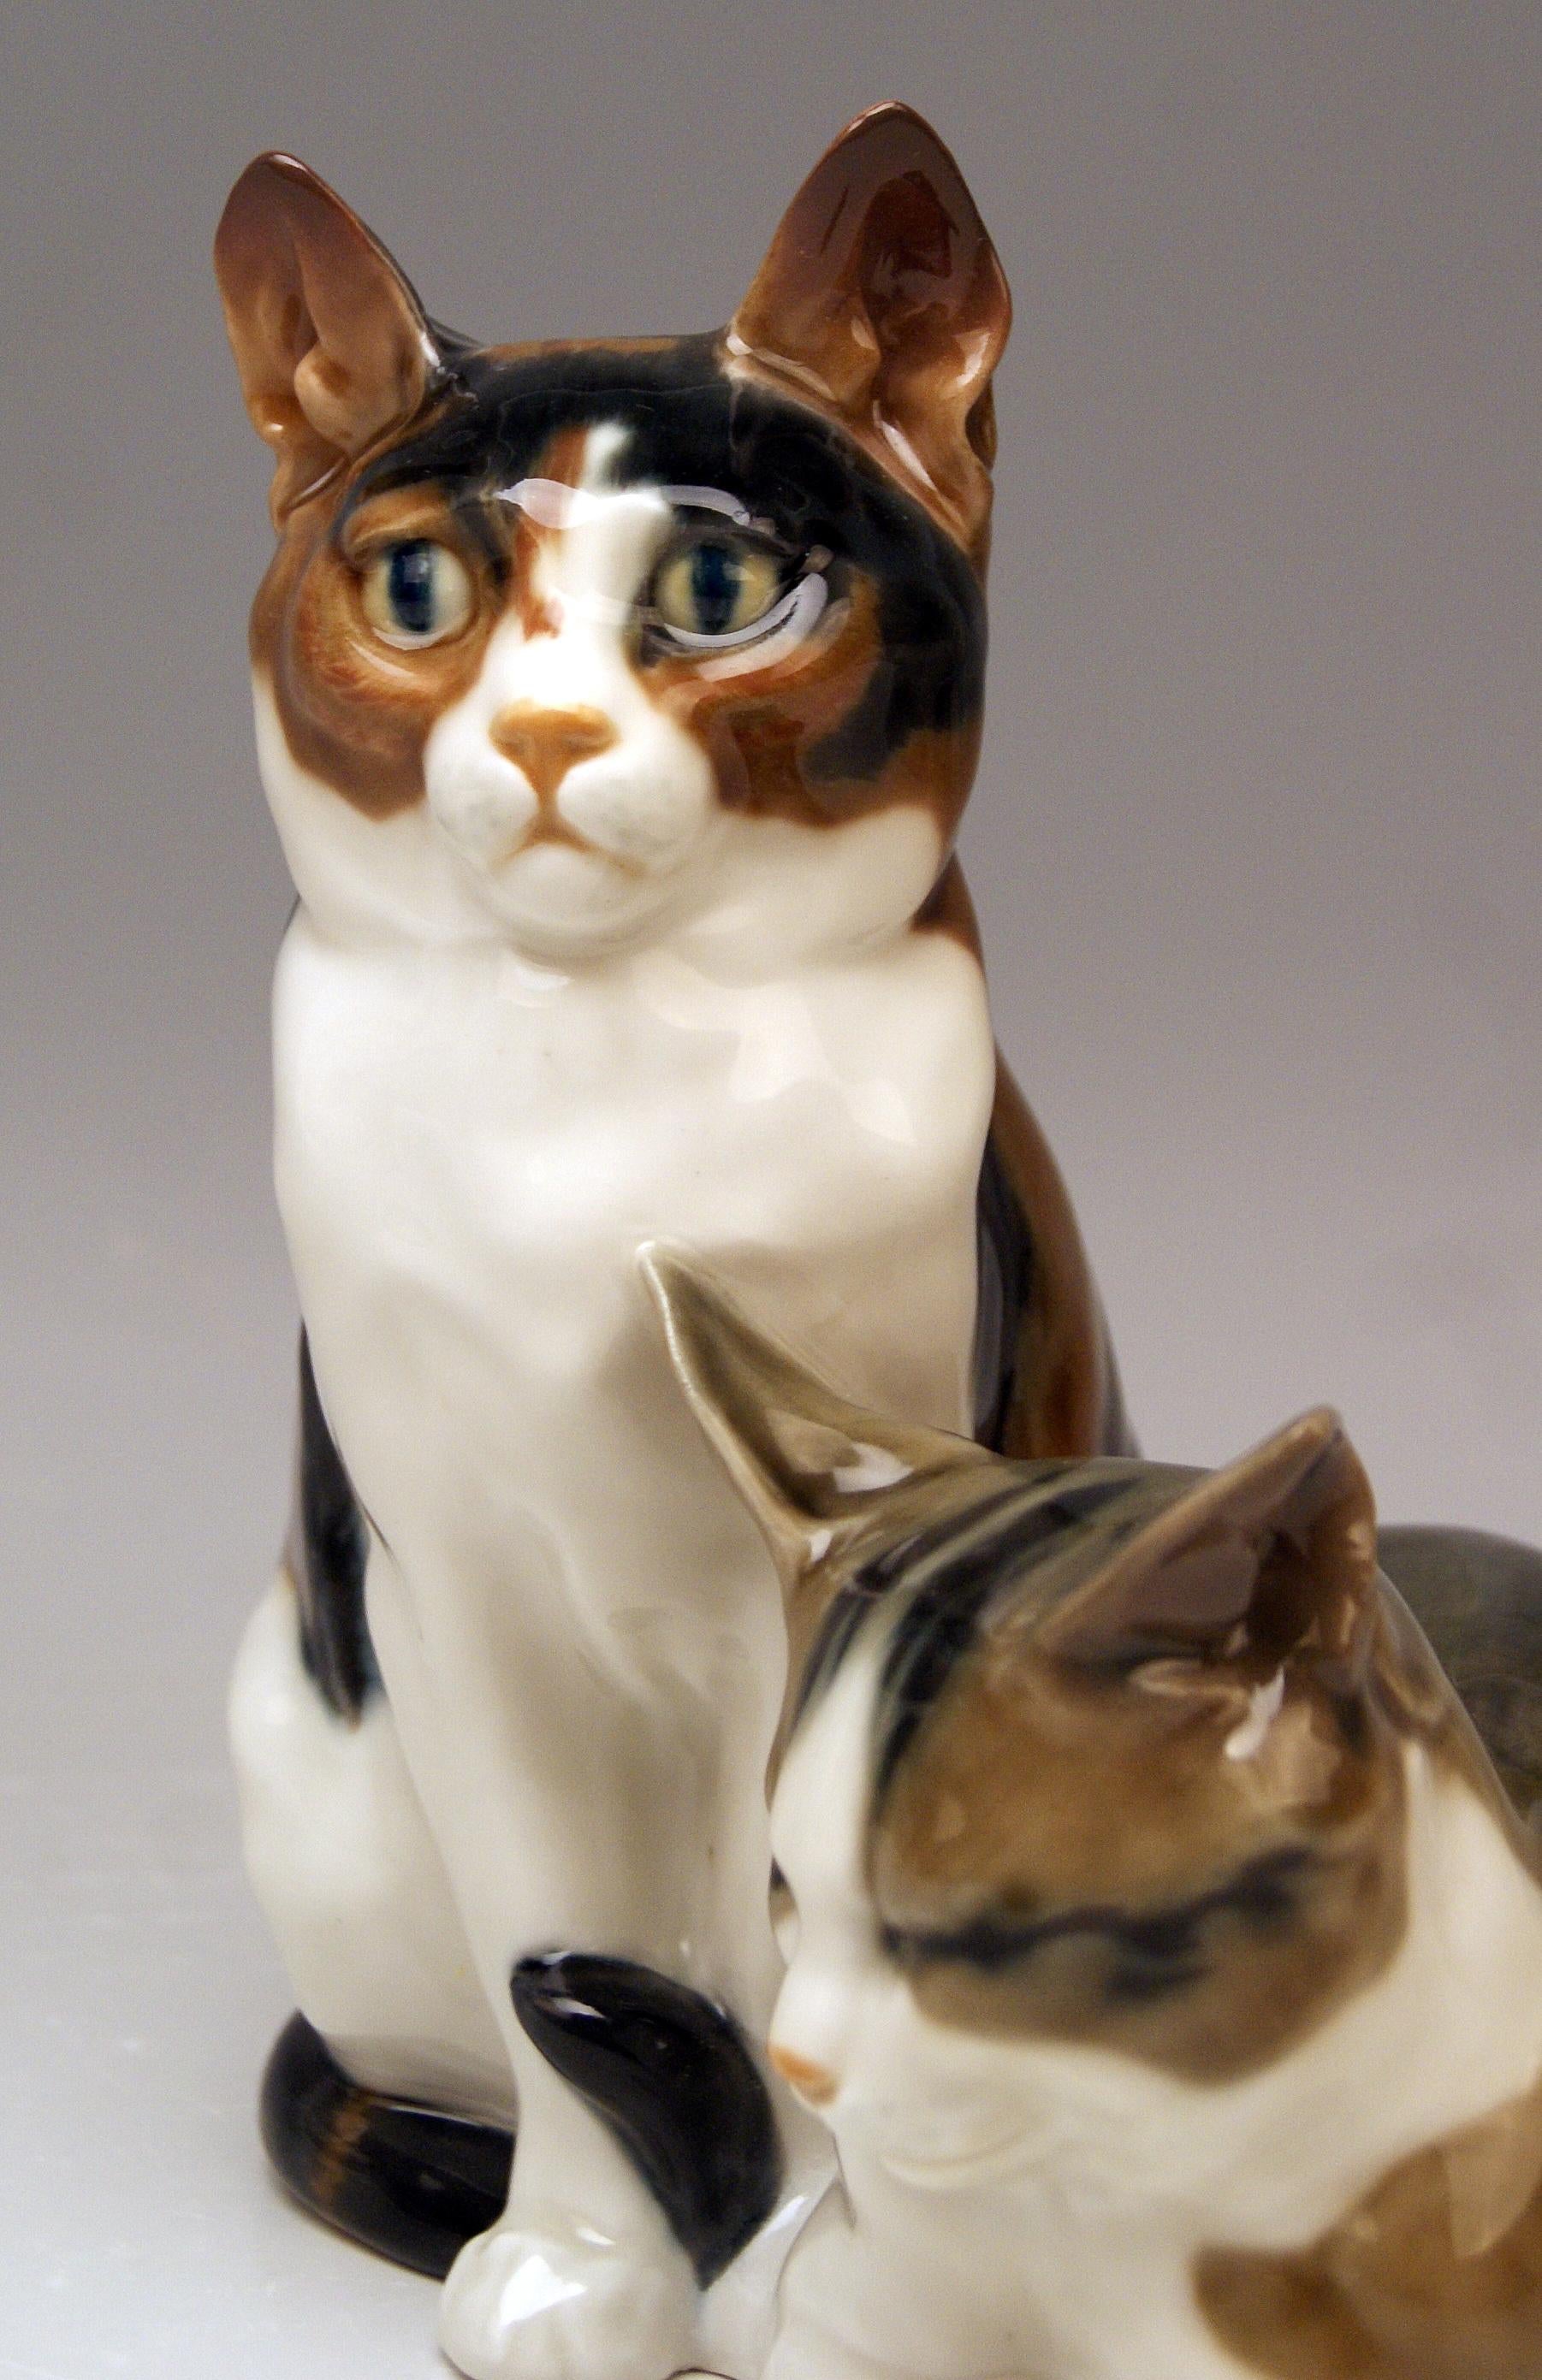 Painted Meissen Pair of Lovely Animals Domestic Cats by Otto Pilz Model H 103 c. 1906-10